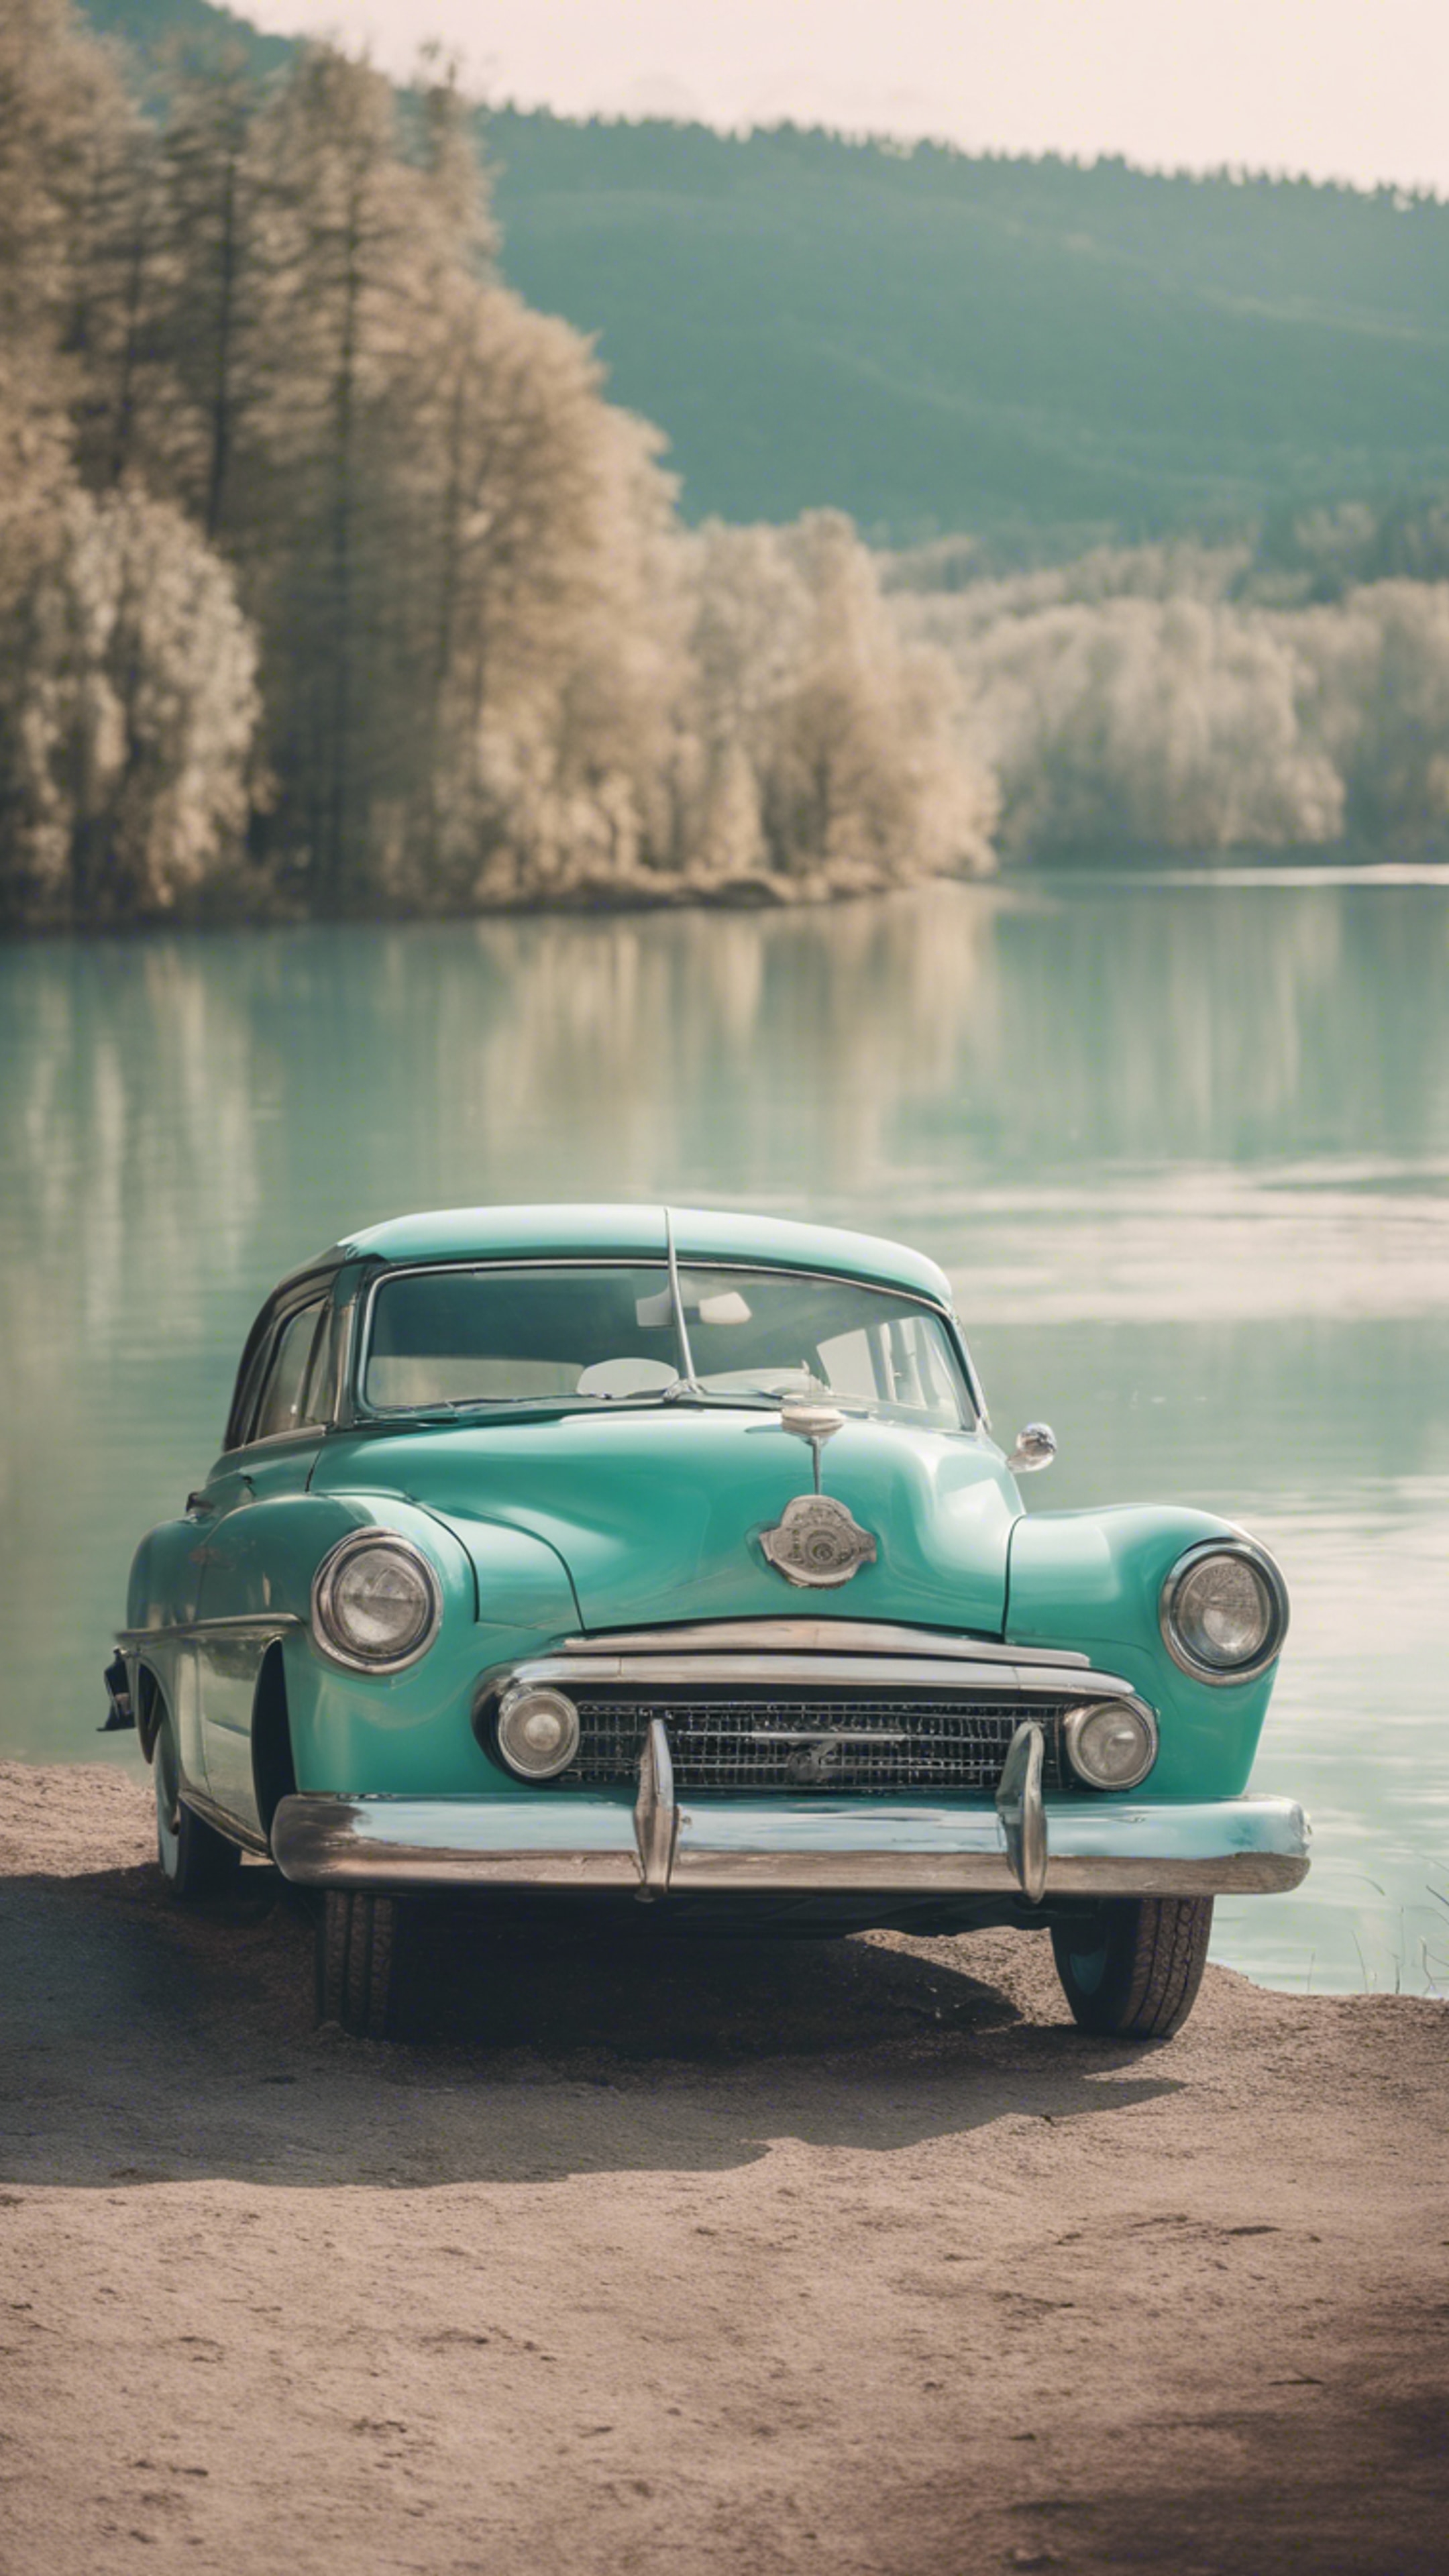 An old, vintage car in cool pastel teal, parked by a beautiful lake. Tapeta[2497290a3fc344ac9be5]